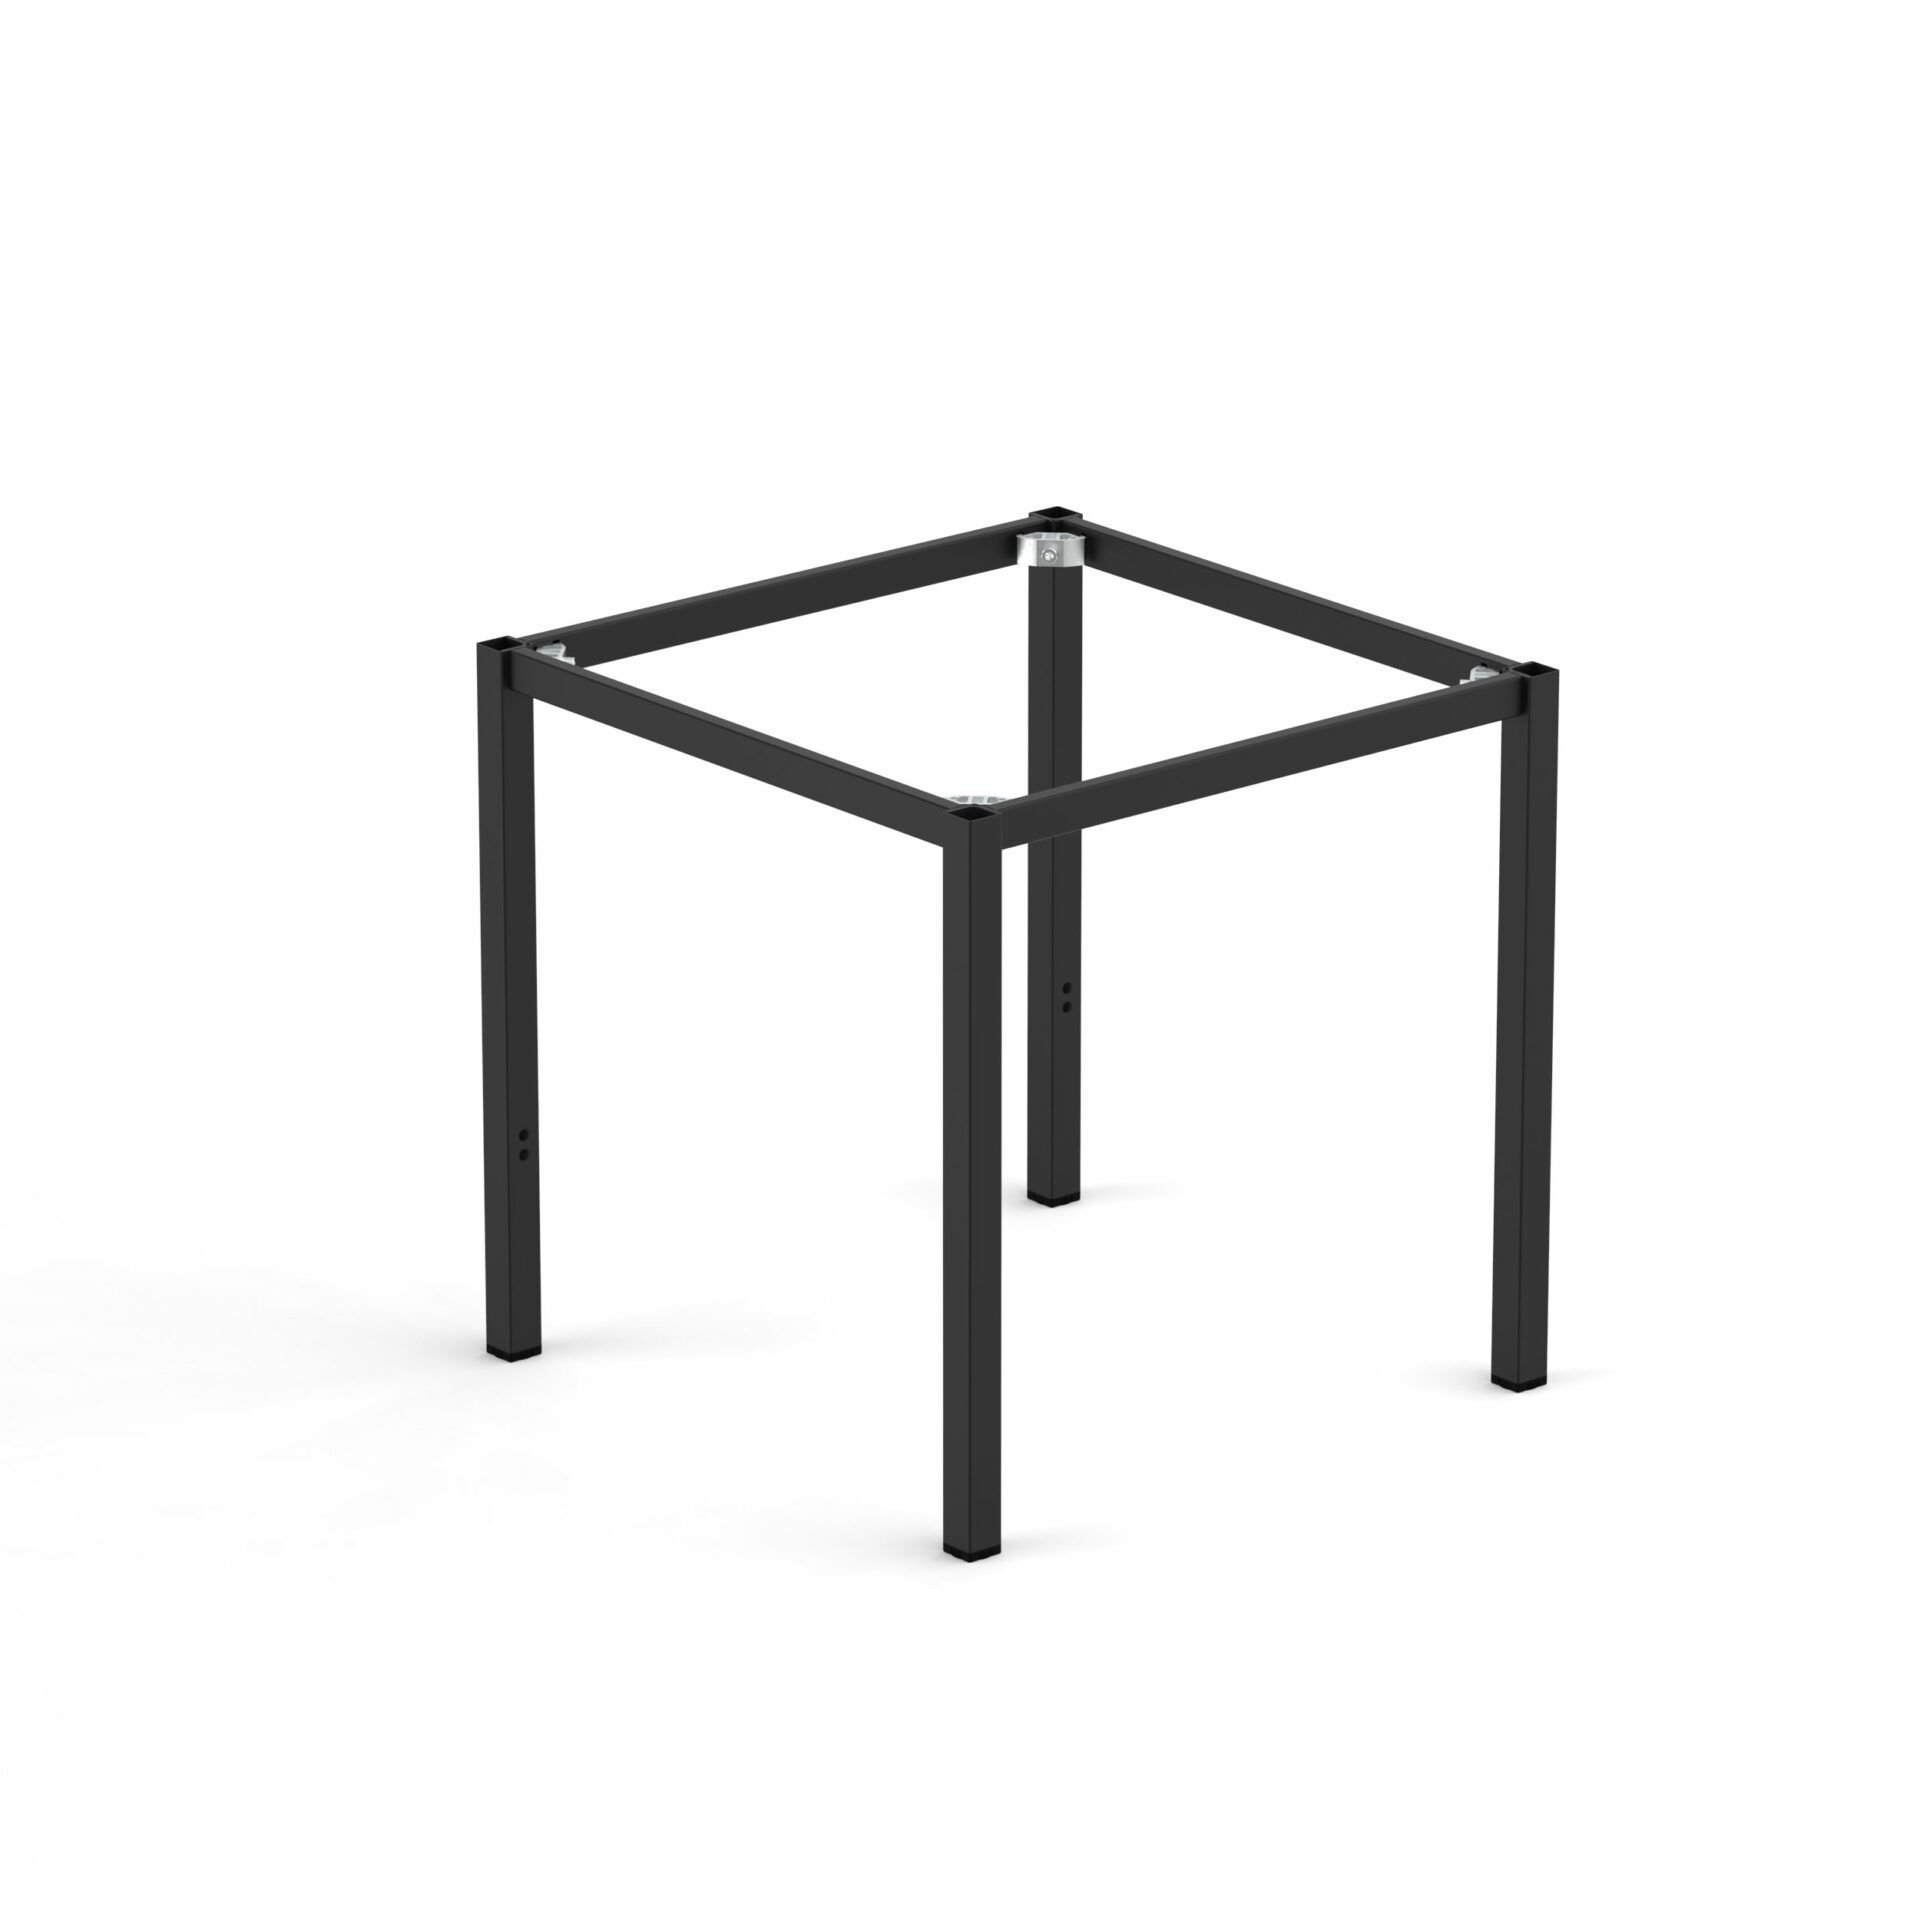 Spire Square leg Table Height Frame 690 x 590 x 720H